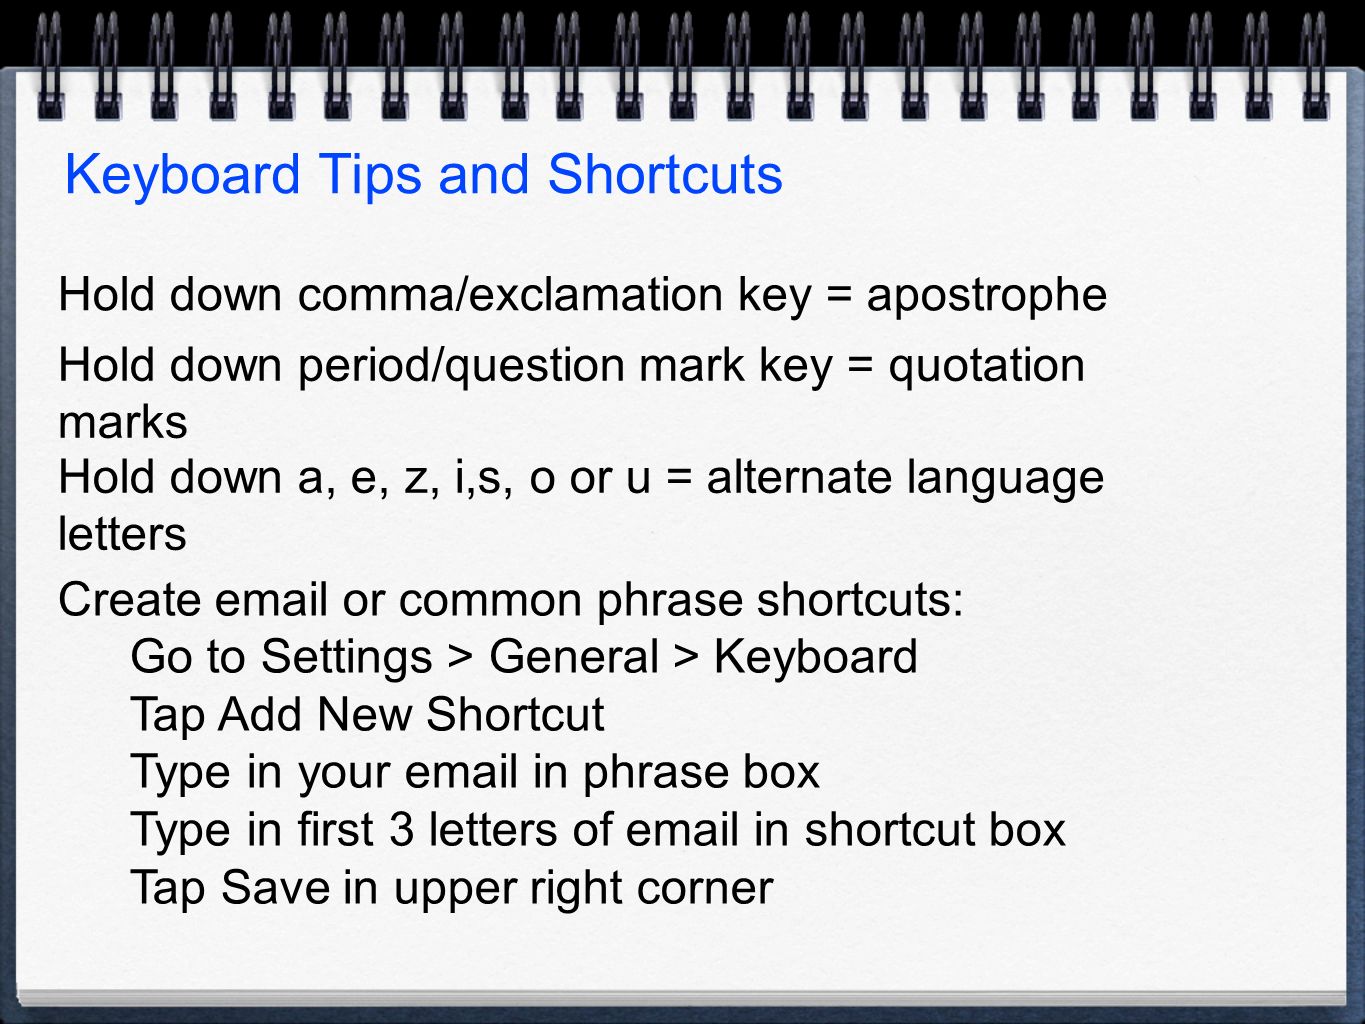 Keyboard Tips and Shortcuts Hold down comma/exclamation key = apostrophe Hold down period/question mark key = quotation marks Hold down a, e, z, i,s, o or u = alternate language letters Create  or common phrase shortcuts: Go to Settings > General > Keyboard Tap Add New Shortcut Type in your  in phrase box Type in first 3 letters of  in shortcut box Tap Save in upper right corner